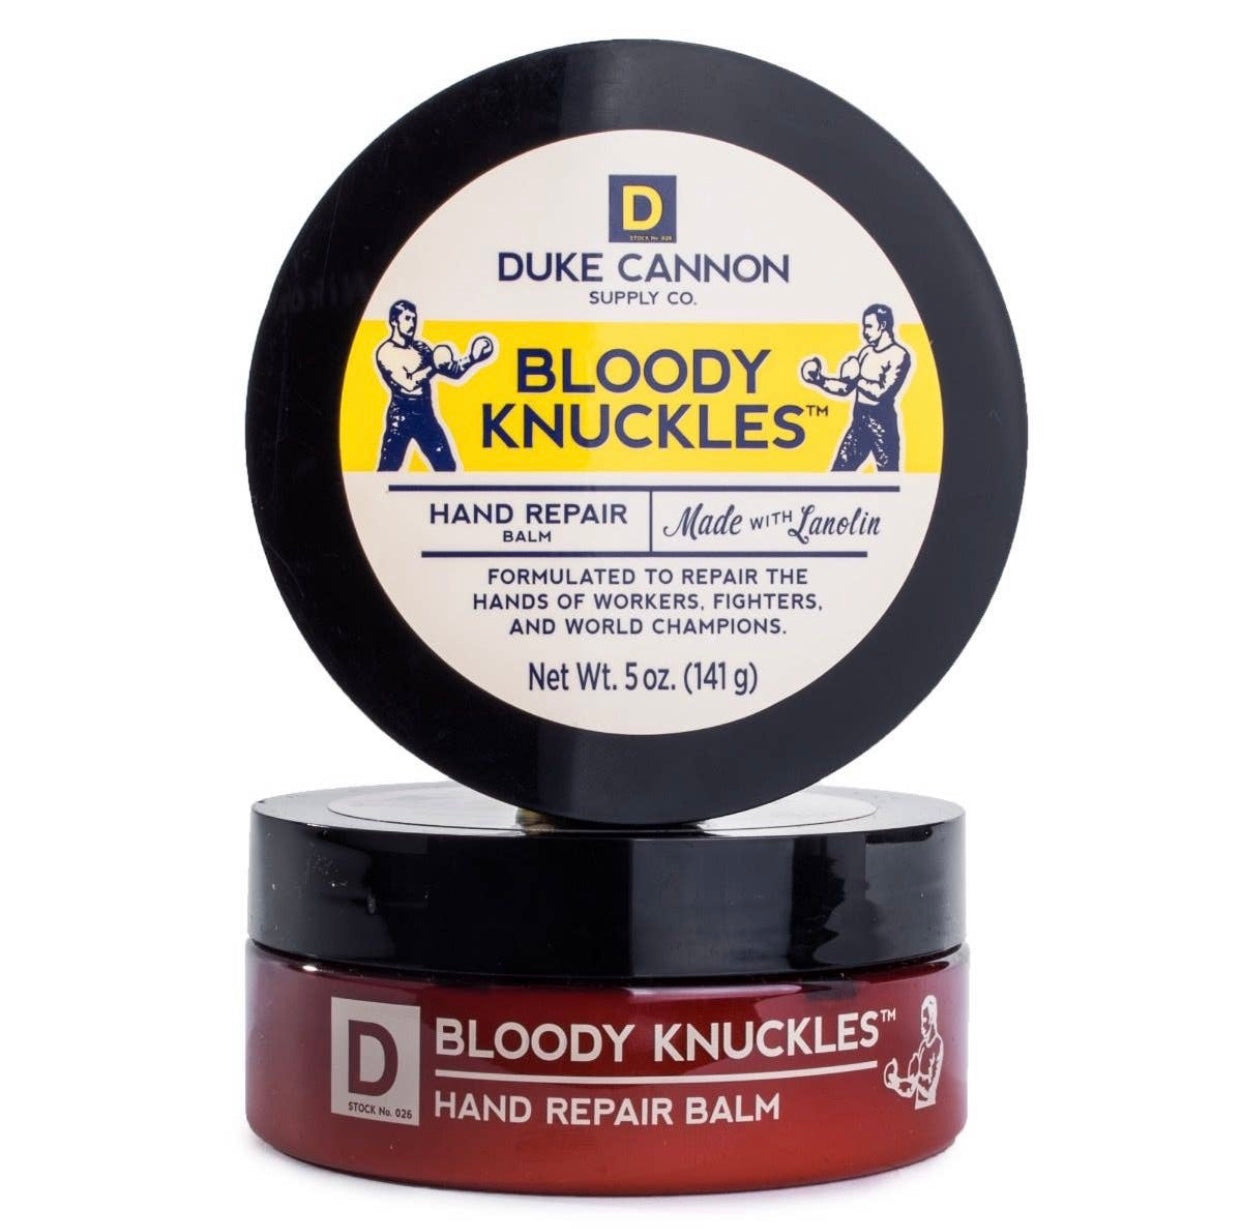 Duke Cannon Bloody Knuckles Hand Repair